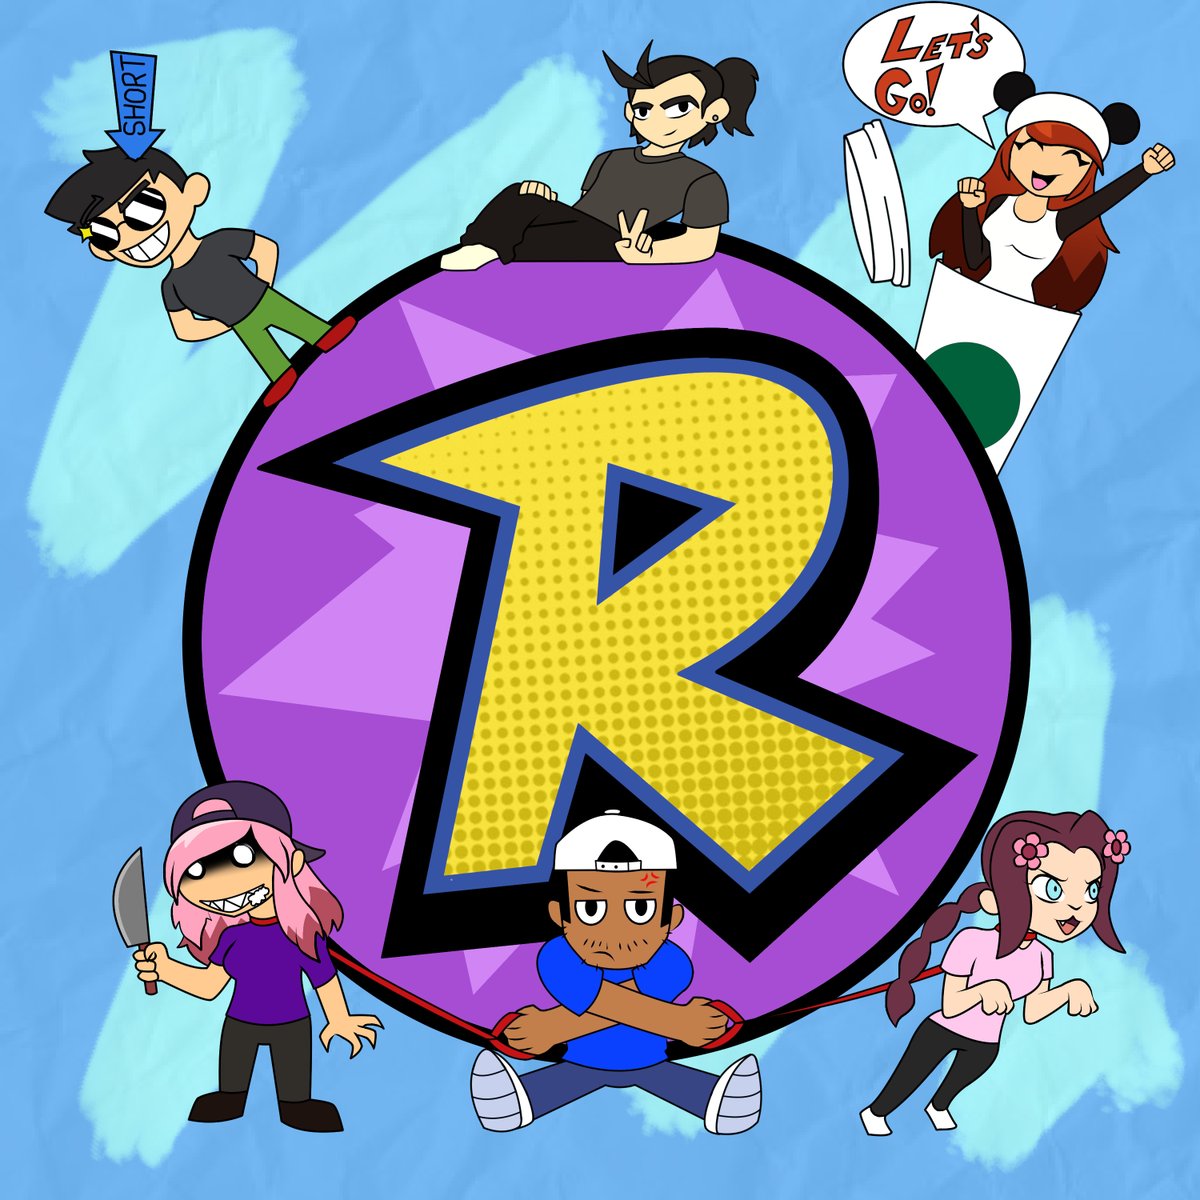 @RecreyoYT was a channel I discovered by chance, and I am glad I have. Just seeing a group of friends together in crazy scenarios, just made each of my days. And although it will be ending soon, I cannot properly show how much I appreciate them... Hopefully this picture helps